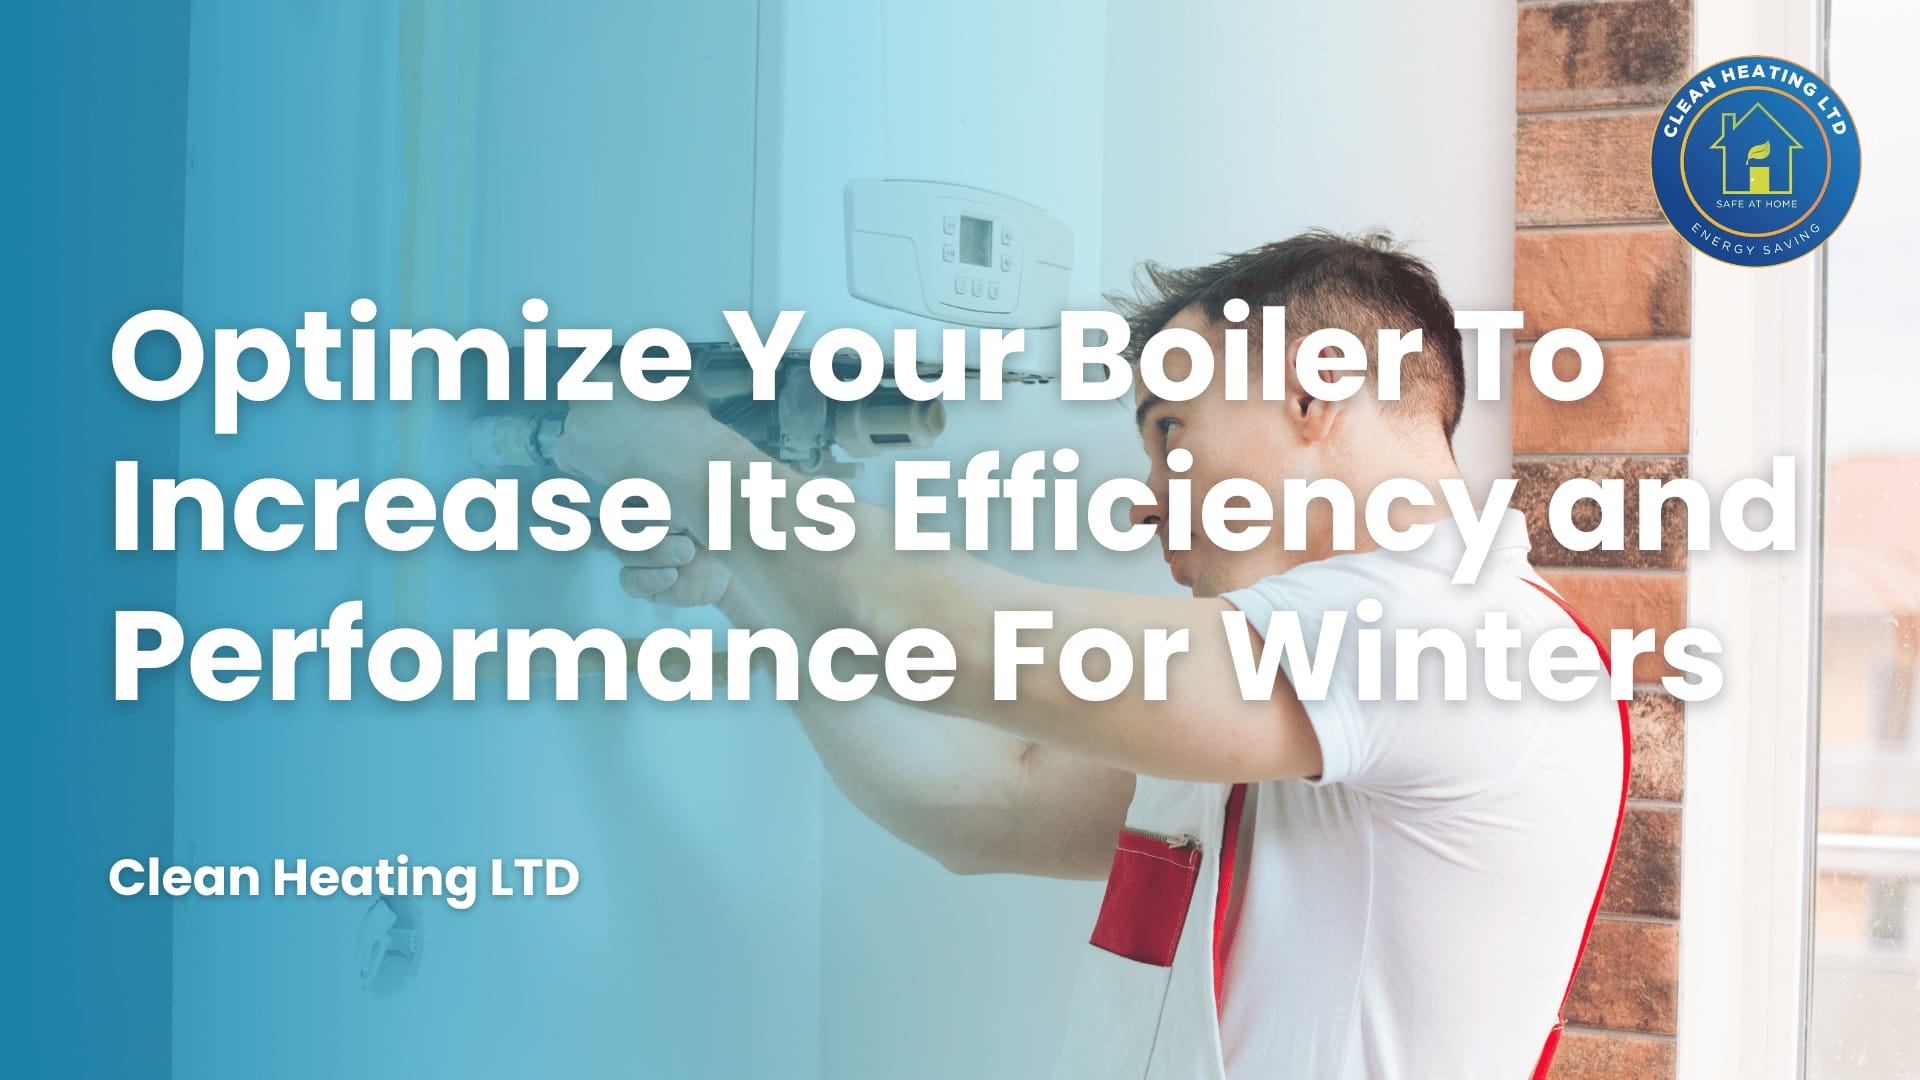 Optimize Your Boiler To Increase Its Efficiency and Performance For Winters 2